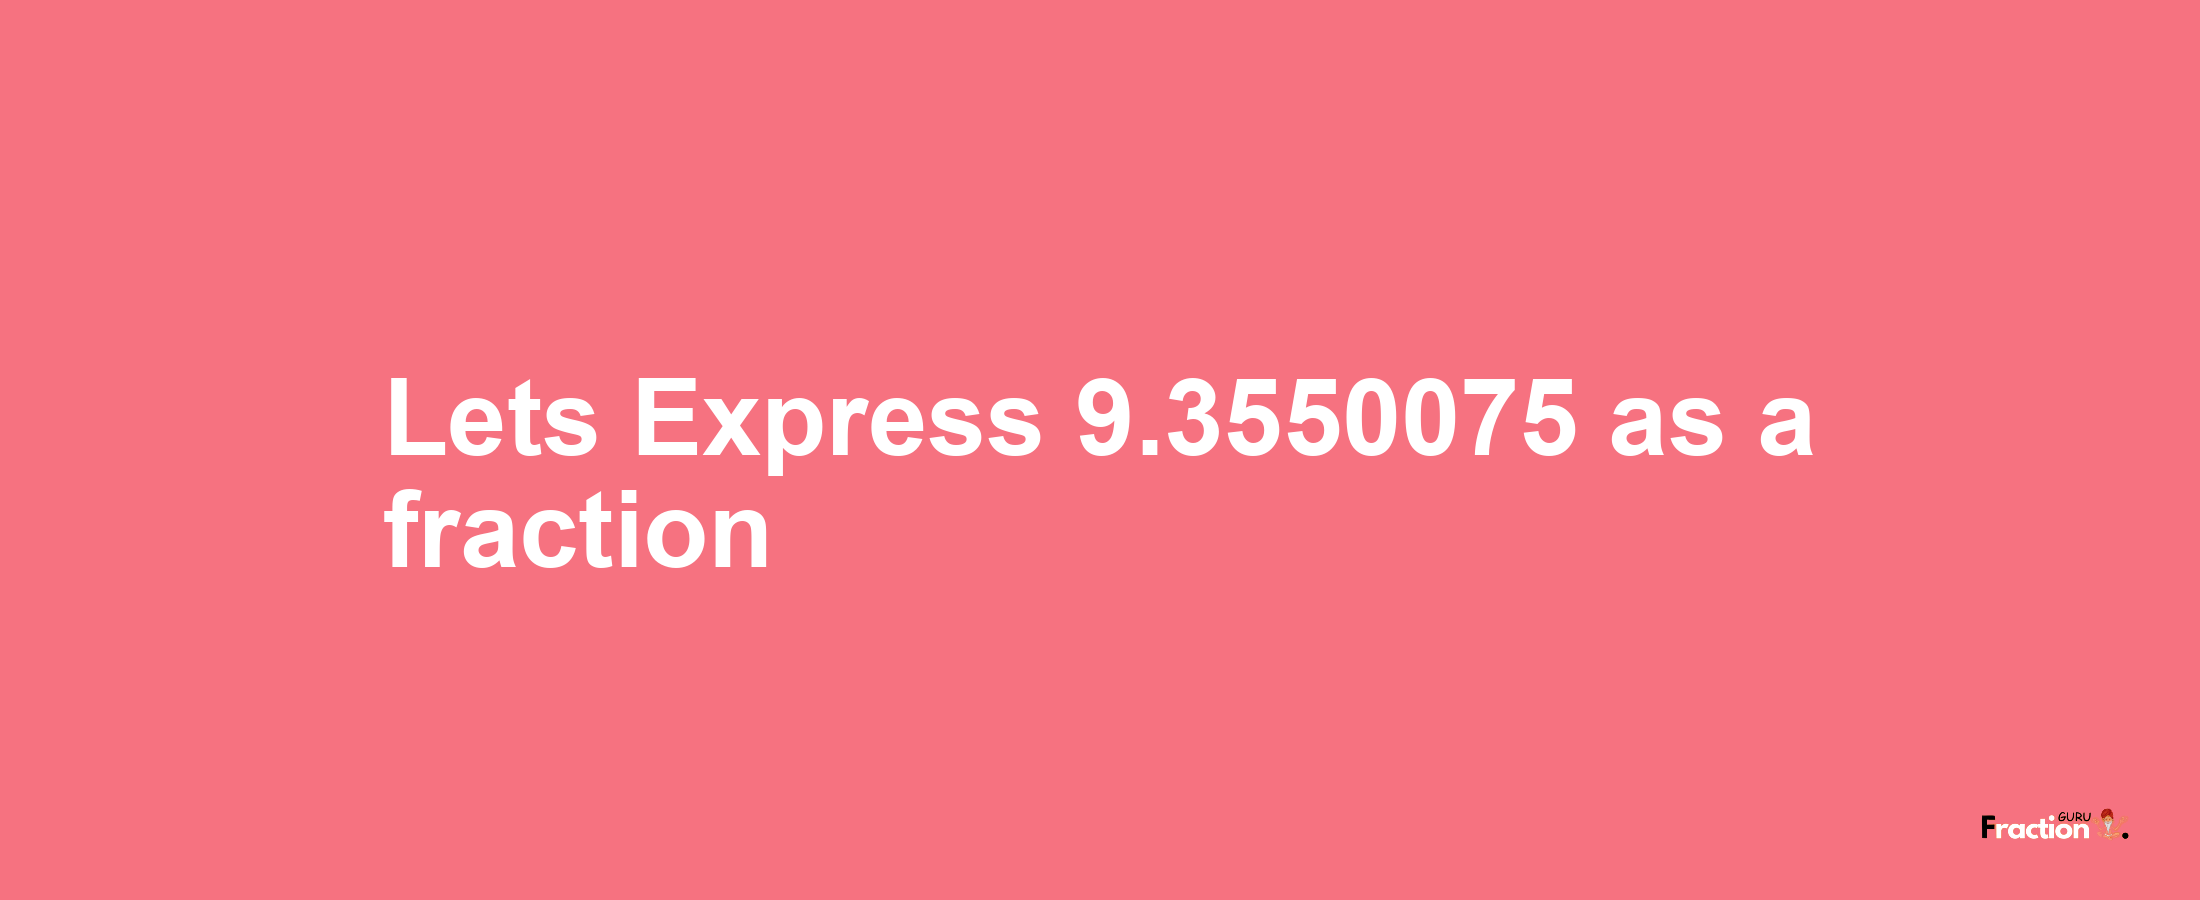 Lets Express 9.3550075 as afraction